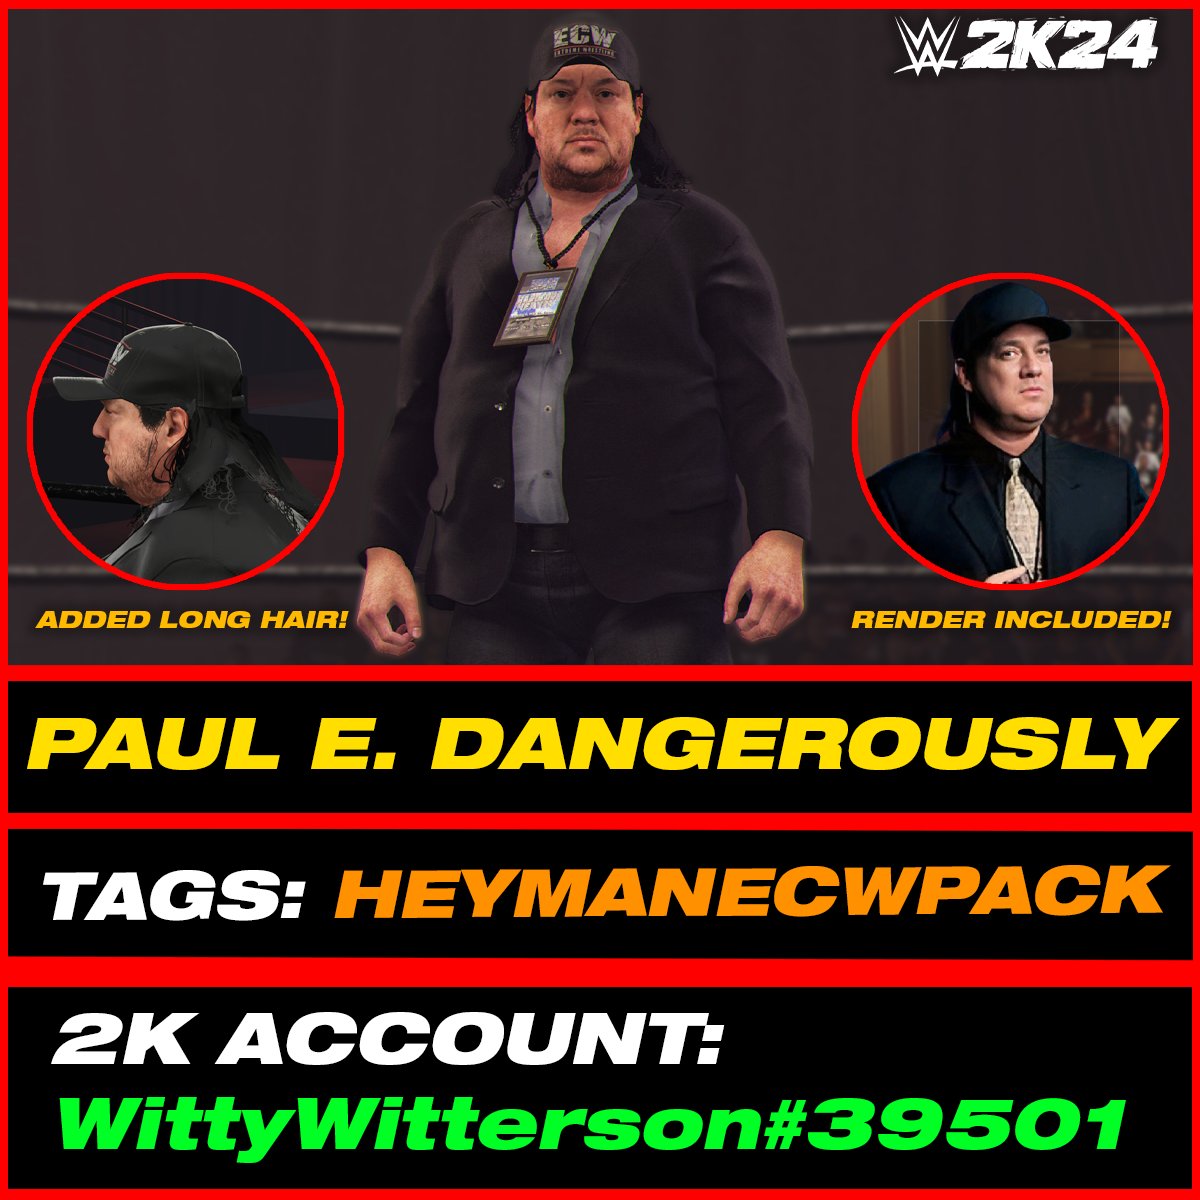 Paul E. Dangerously (In-Game Edit) is uploaded onto Community Creations #WWE2K24 

•Hashtags are: HEYMANECWPACK, WITTY226, PaulHeyman

•Collab w/ @SniperCAWS 

INCLUDES:
• Render
• 'Paul E Dangerous Lee' Call Name
• Commentary
• Added Hair & Beard

@JustBryanNY @LexxGotNext